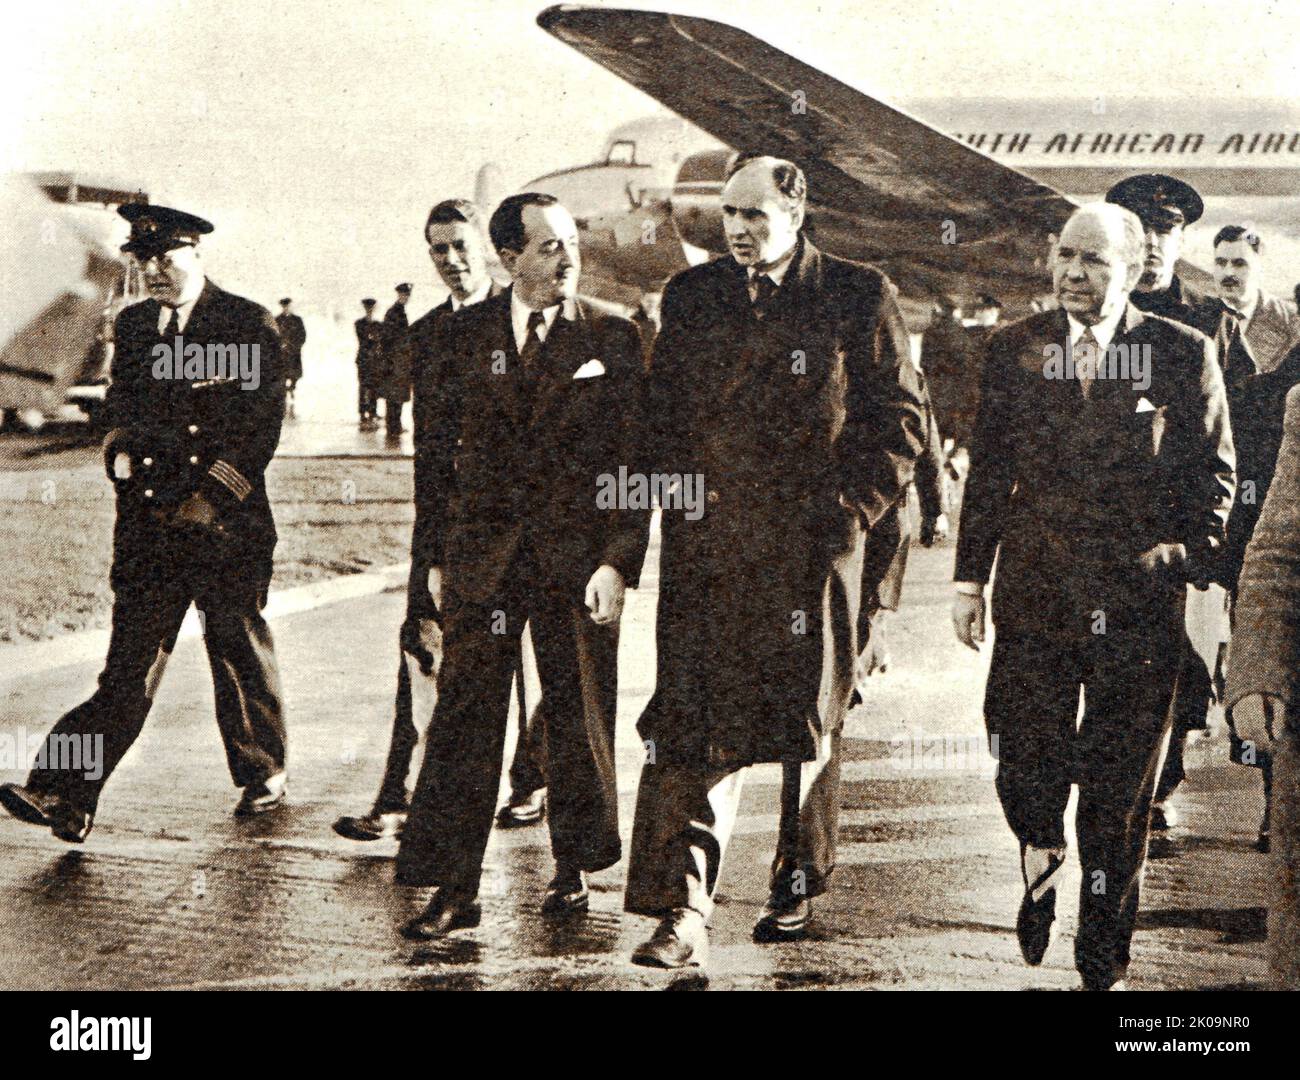 Evelyn John St Loe Strachey, Minister of Food, arriving at London Airport from East Africa. Evelyn John St Loe Strachey (21 October 1901 - 15 July 1963) was a British Labour politician and writer. A journalist by profession, Strachey was elected to Parliament in 1929. Strachey lost his seat in 1931, was a Communist sympathiser for the rest of the 1930s and broke with the Communist Party in 1940. During the Second World War, Strachey served as a Royal Air Force officer in planning and public relations roles. He was once again elected to Parliament as a Labour MP in 1945 and held office under Cl Stock Photo